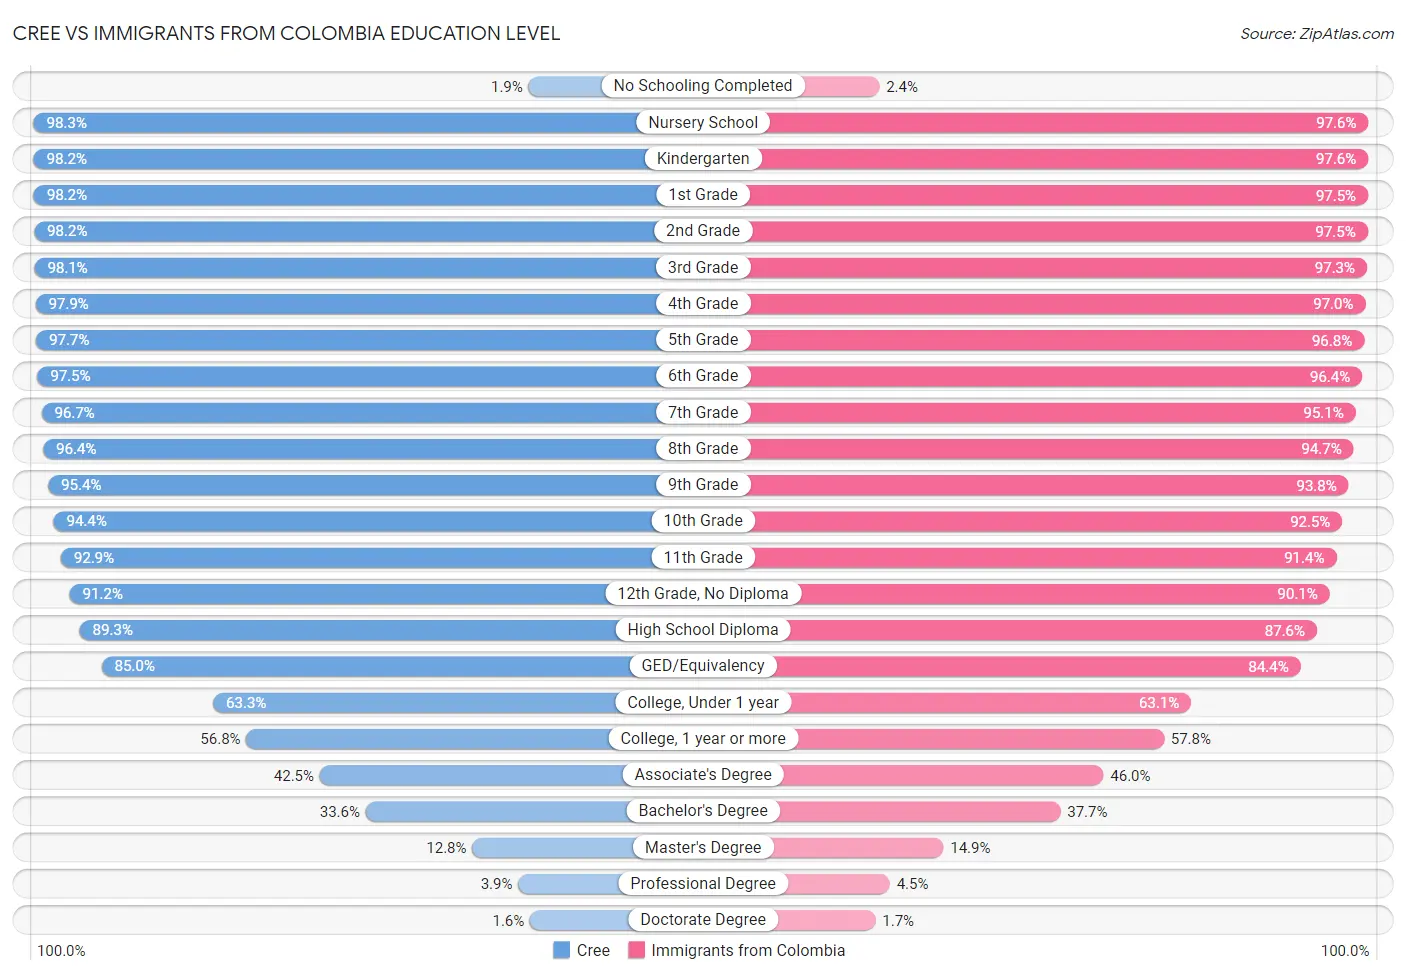 Cree vs Immigrants from Colombia Education Level